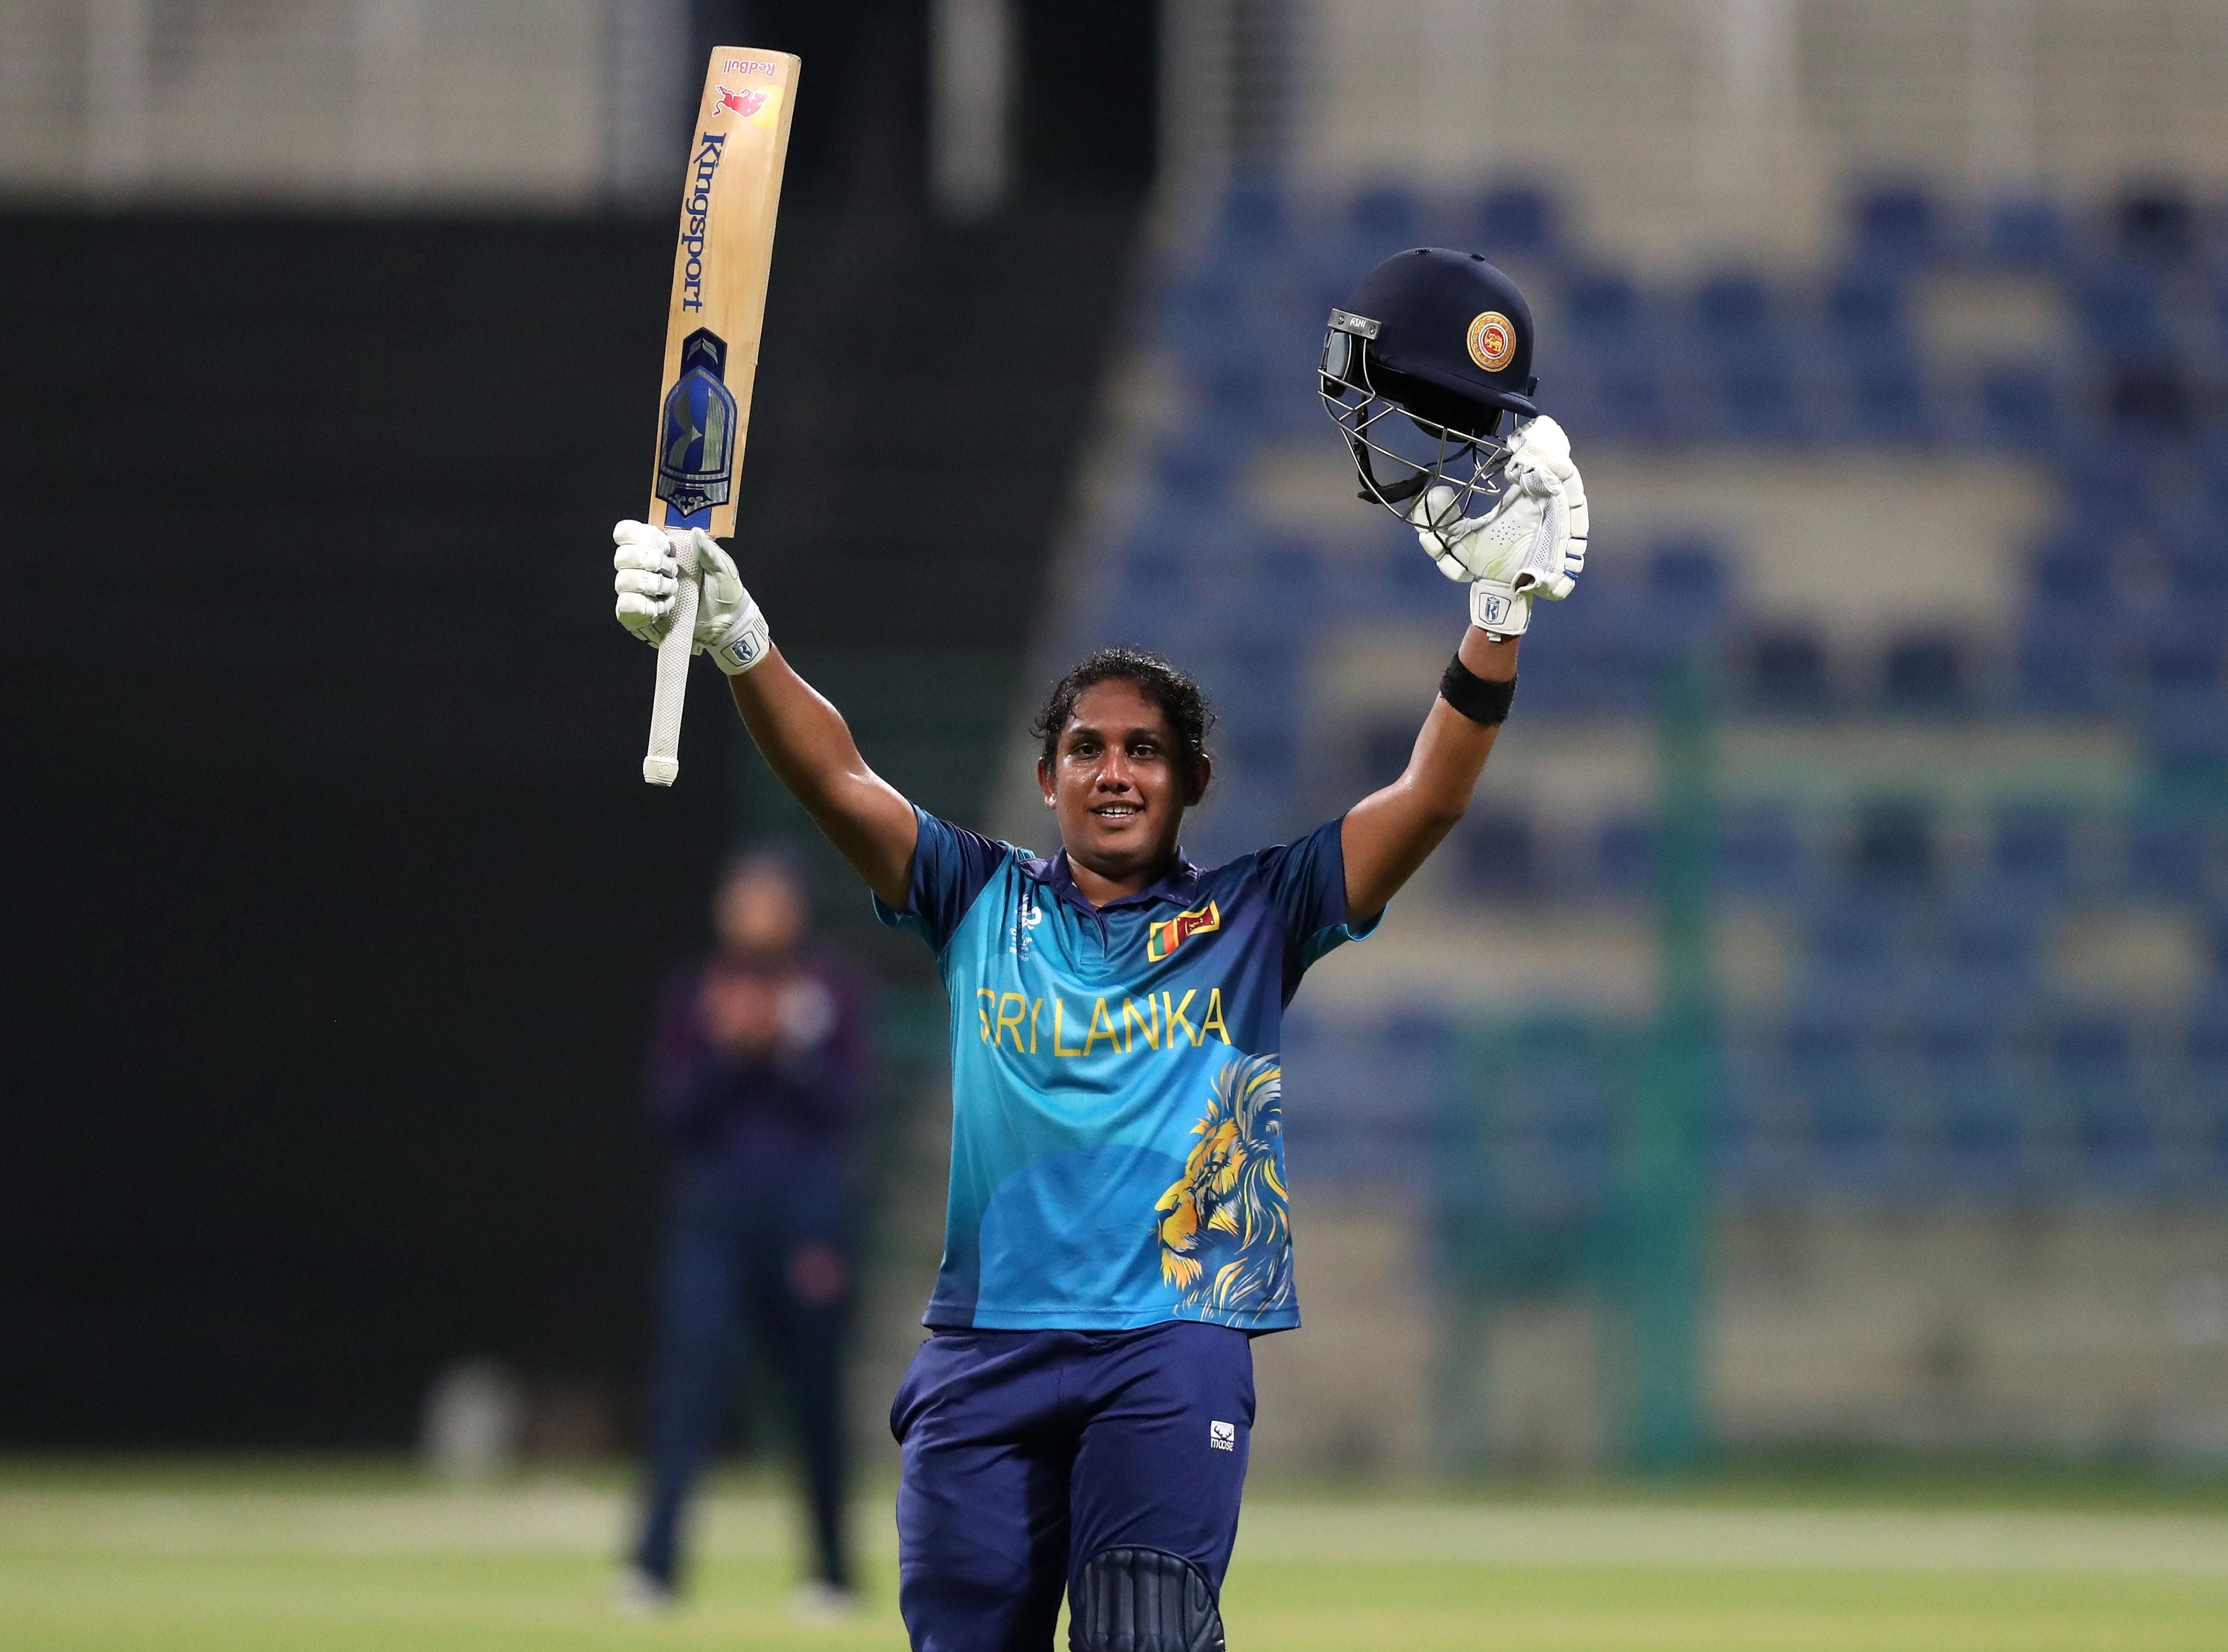 chamari athapaththu signs off on t20 world cup qualification in style with century